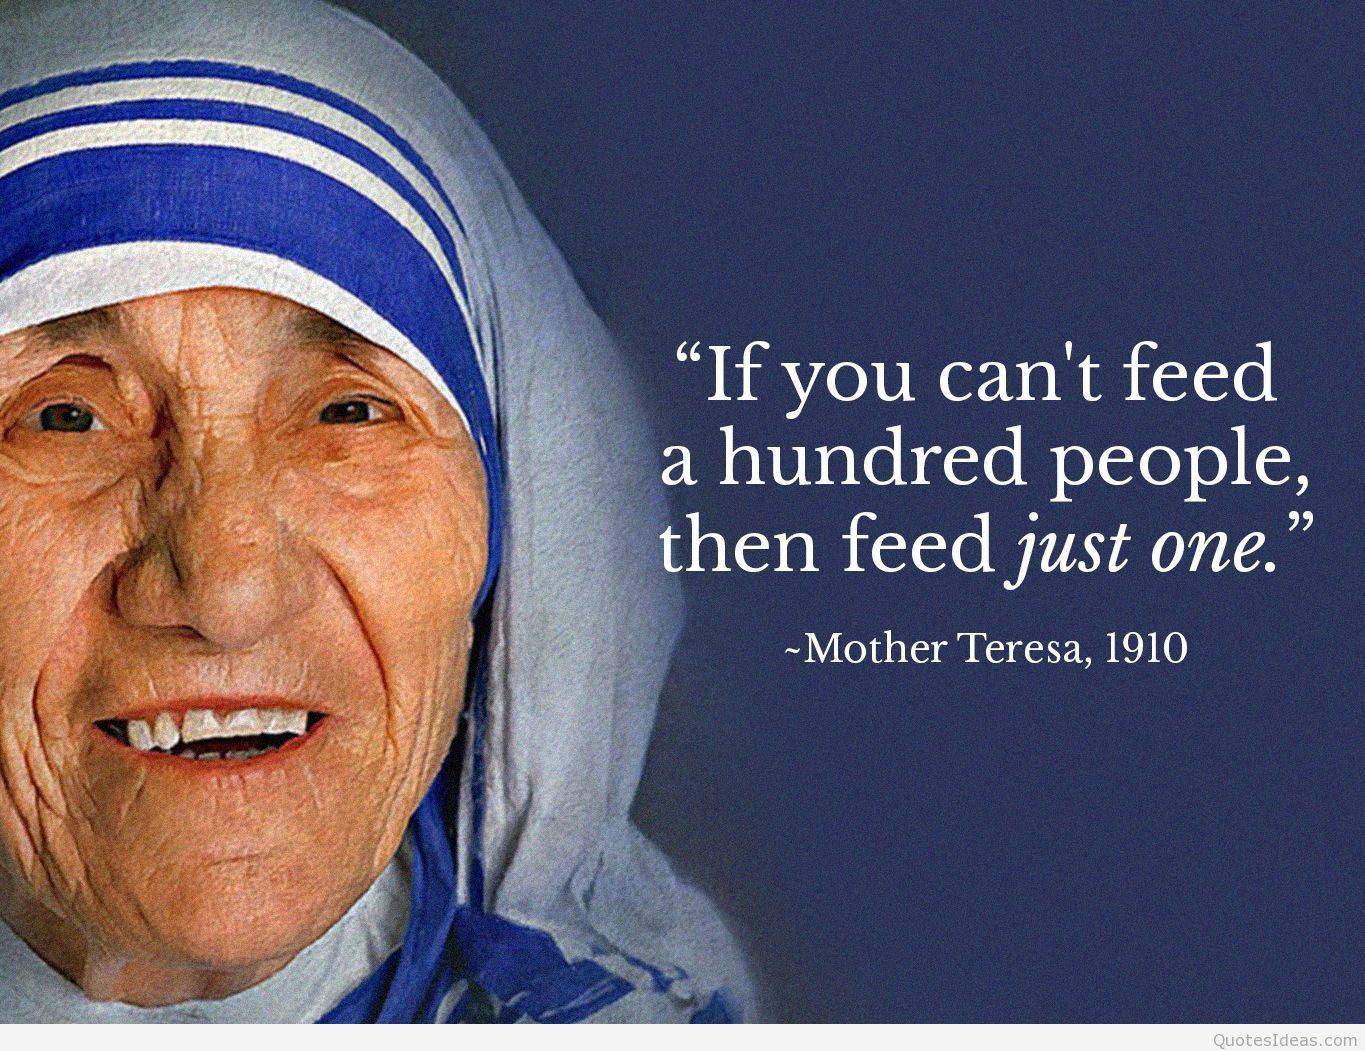 Best Mother Teresa quotes sayings with pics image